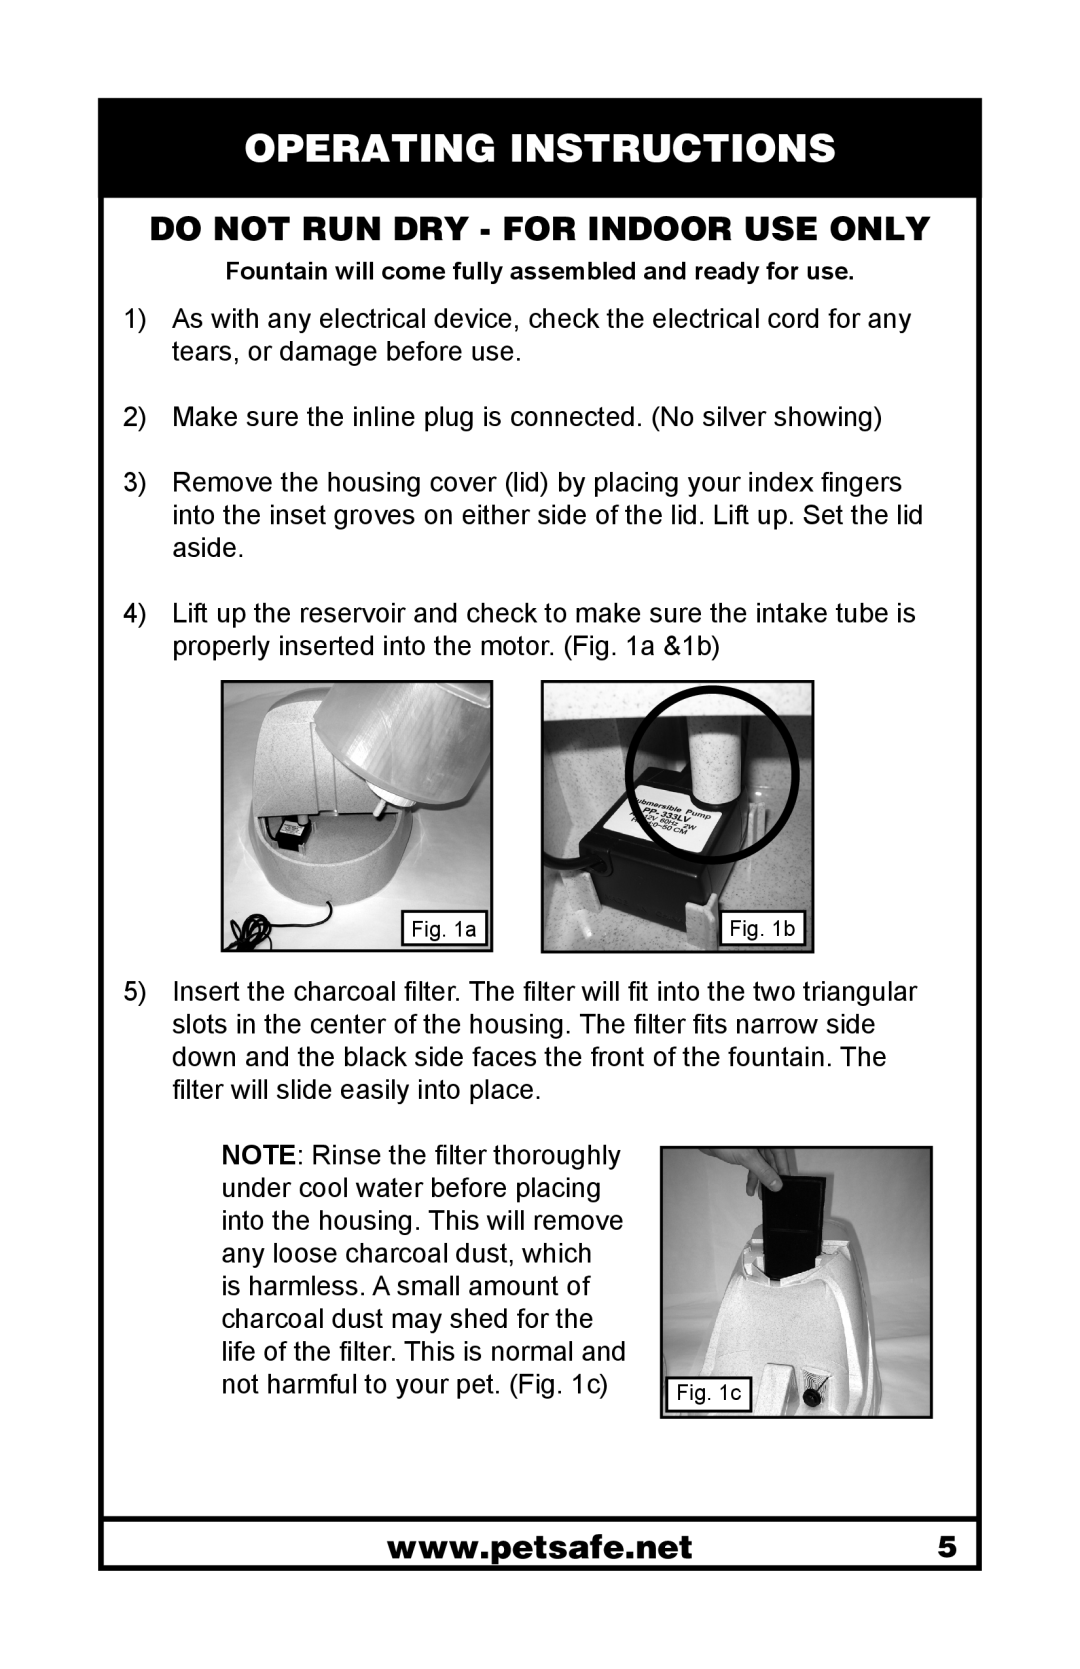 Petsafe 400-1255-19 manuel dutilisation Operating Instructions, Do Not Run Dry - For Indoor Use Only 